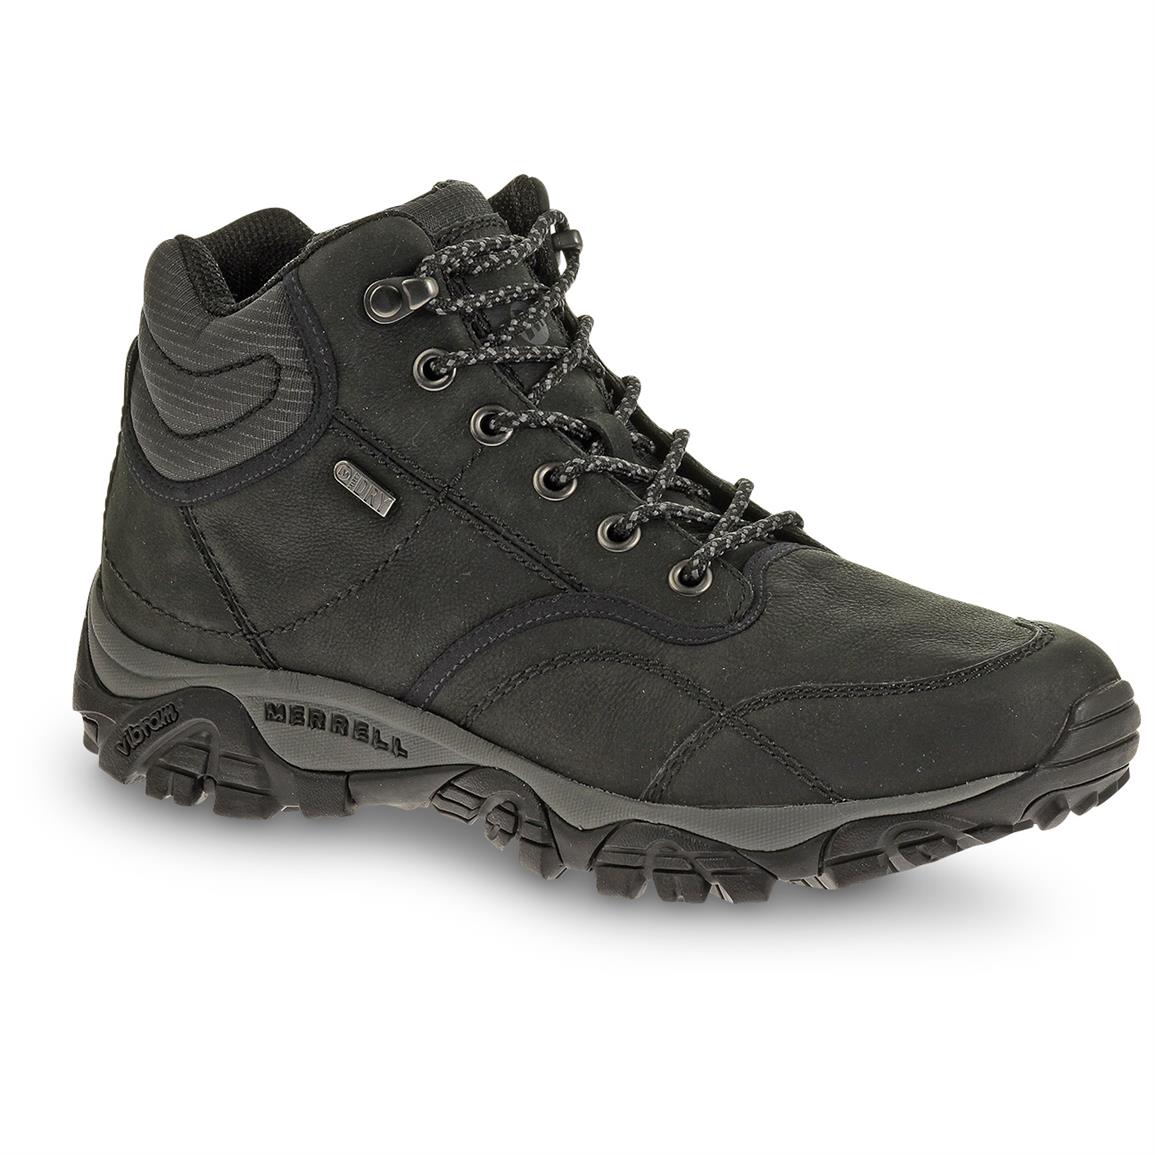 Merrell Men's Rover Mid Waterproof Boots - 617446, Hiking Boots & Shoes ...